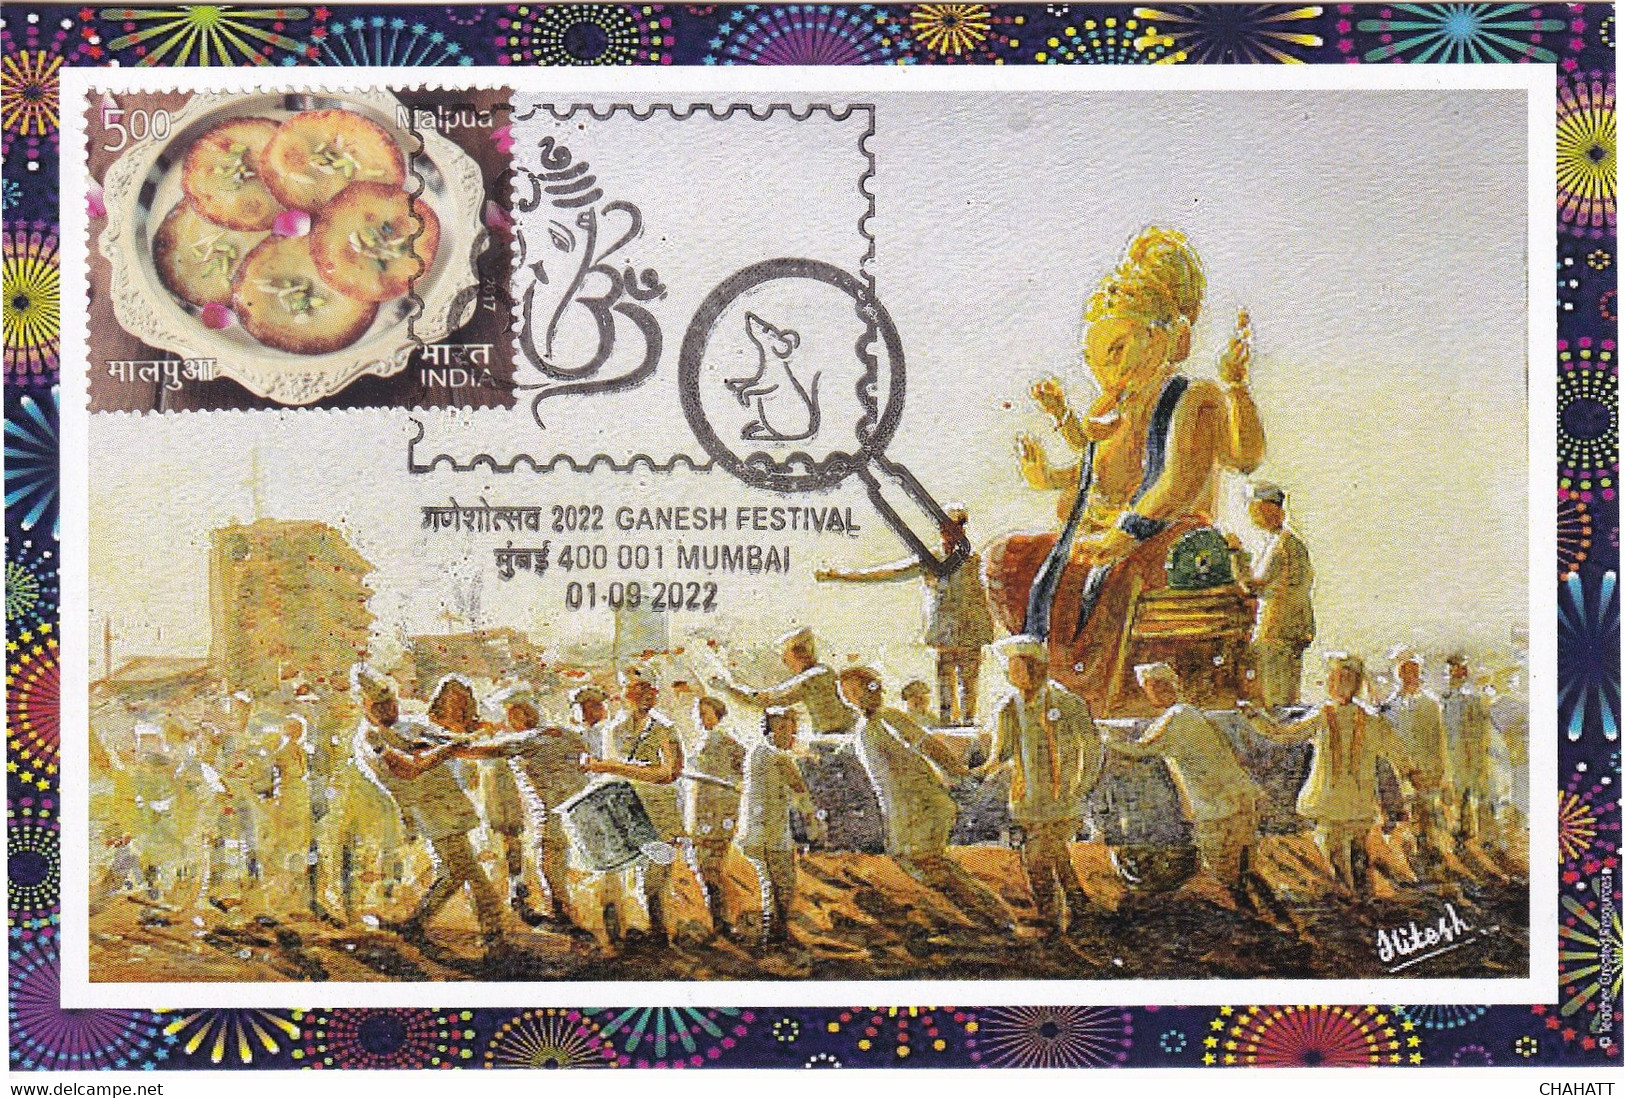 HINDUISM - LORD GANESHA - FESTIVAL -PPC WITH PICTORIAL CANCEL -#1 OF 15 -INDIA-2022- NMC2-35 - Induismo